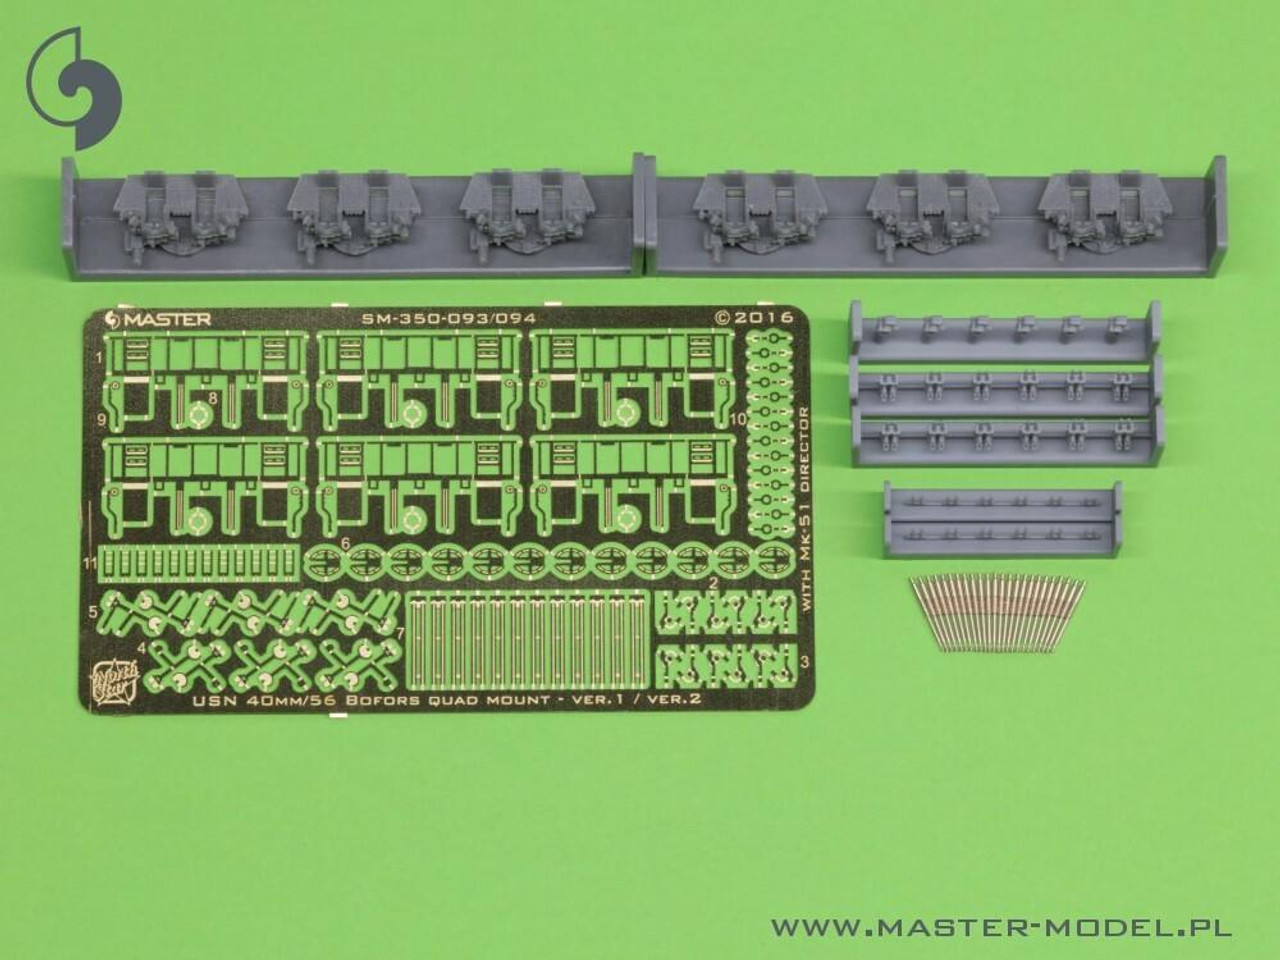 MAS-SM-350-093 1/350 Master Model USN 40 mm/56 Bofors quadruple mount ver.1 / with Mk-51 director - resin, PE and turned parts - 6pcs MMD Squadron